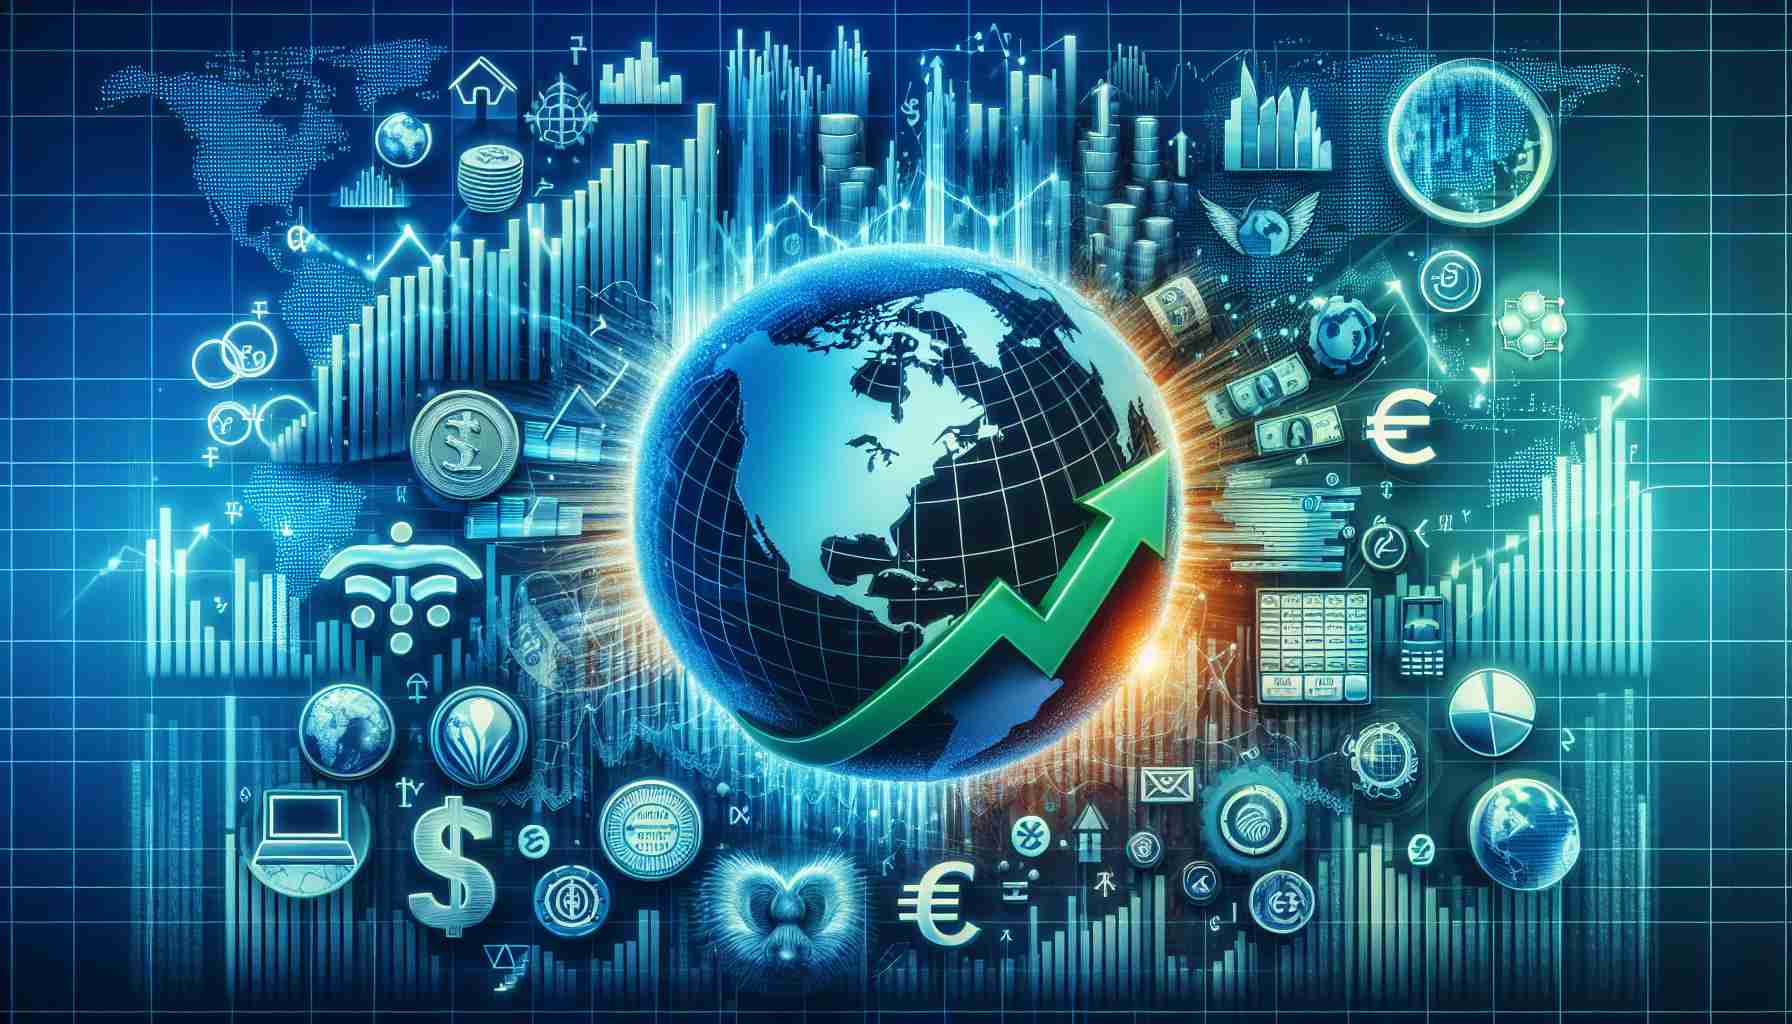 Create a realistic, high-definition image representing the global economy bouncing back after an unexpected disruption. Elements could include a stylized image of a globe, surrounded by symbols of various worldwide industries and economic sectors flourishing. There could be charts displaying an upward trend, currency symbols from various parts of the world, a stock exchange board showing green figures, and logos of different types of industries such as technology, agriculture, manufacturing, and services sector recovering and flourishing. The colors should indicate positive growth and recuperation.